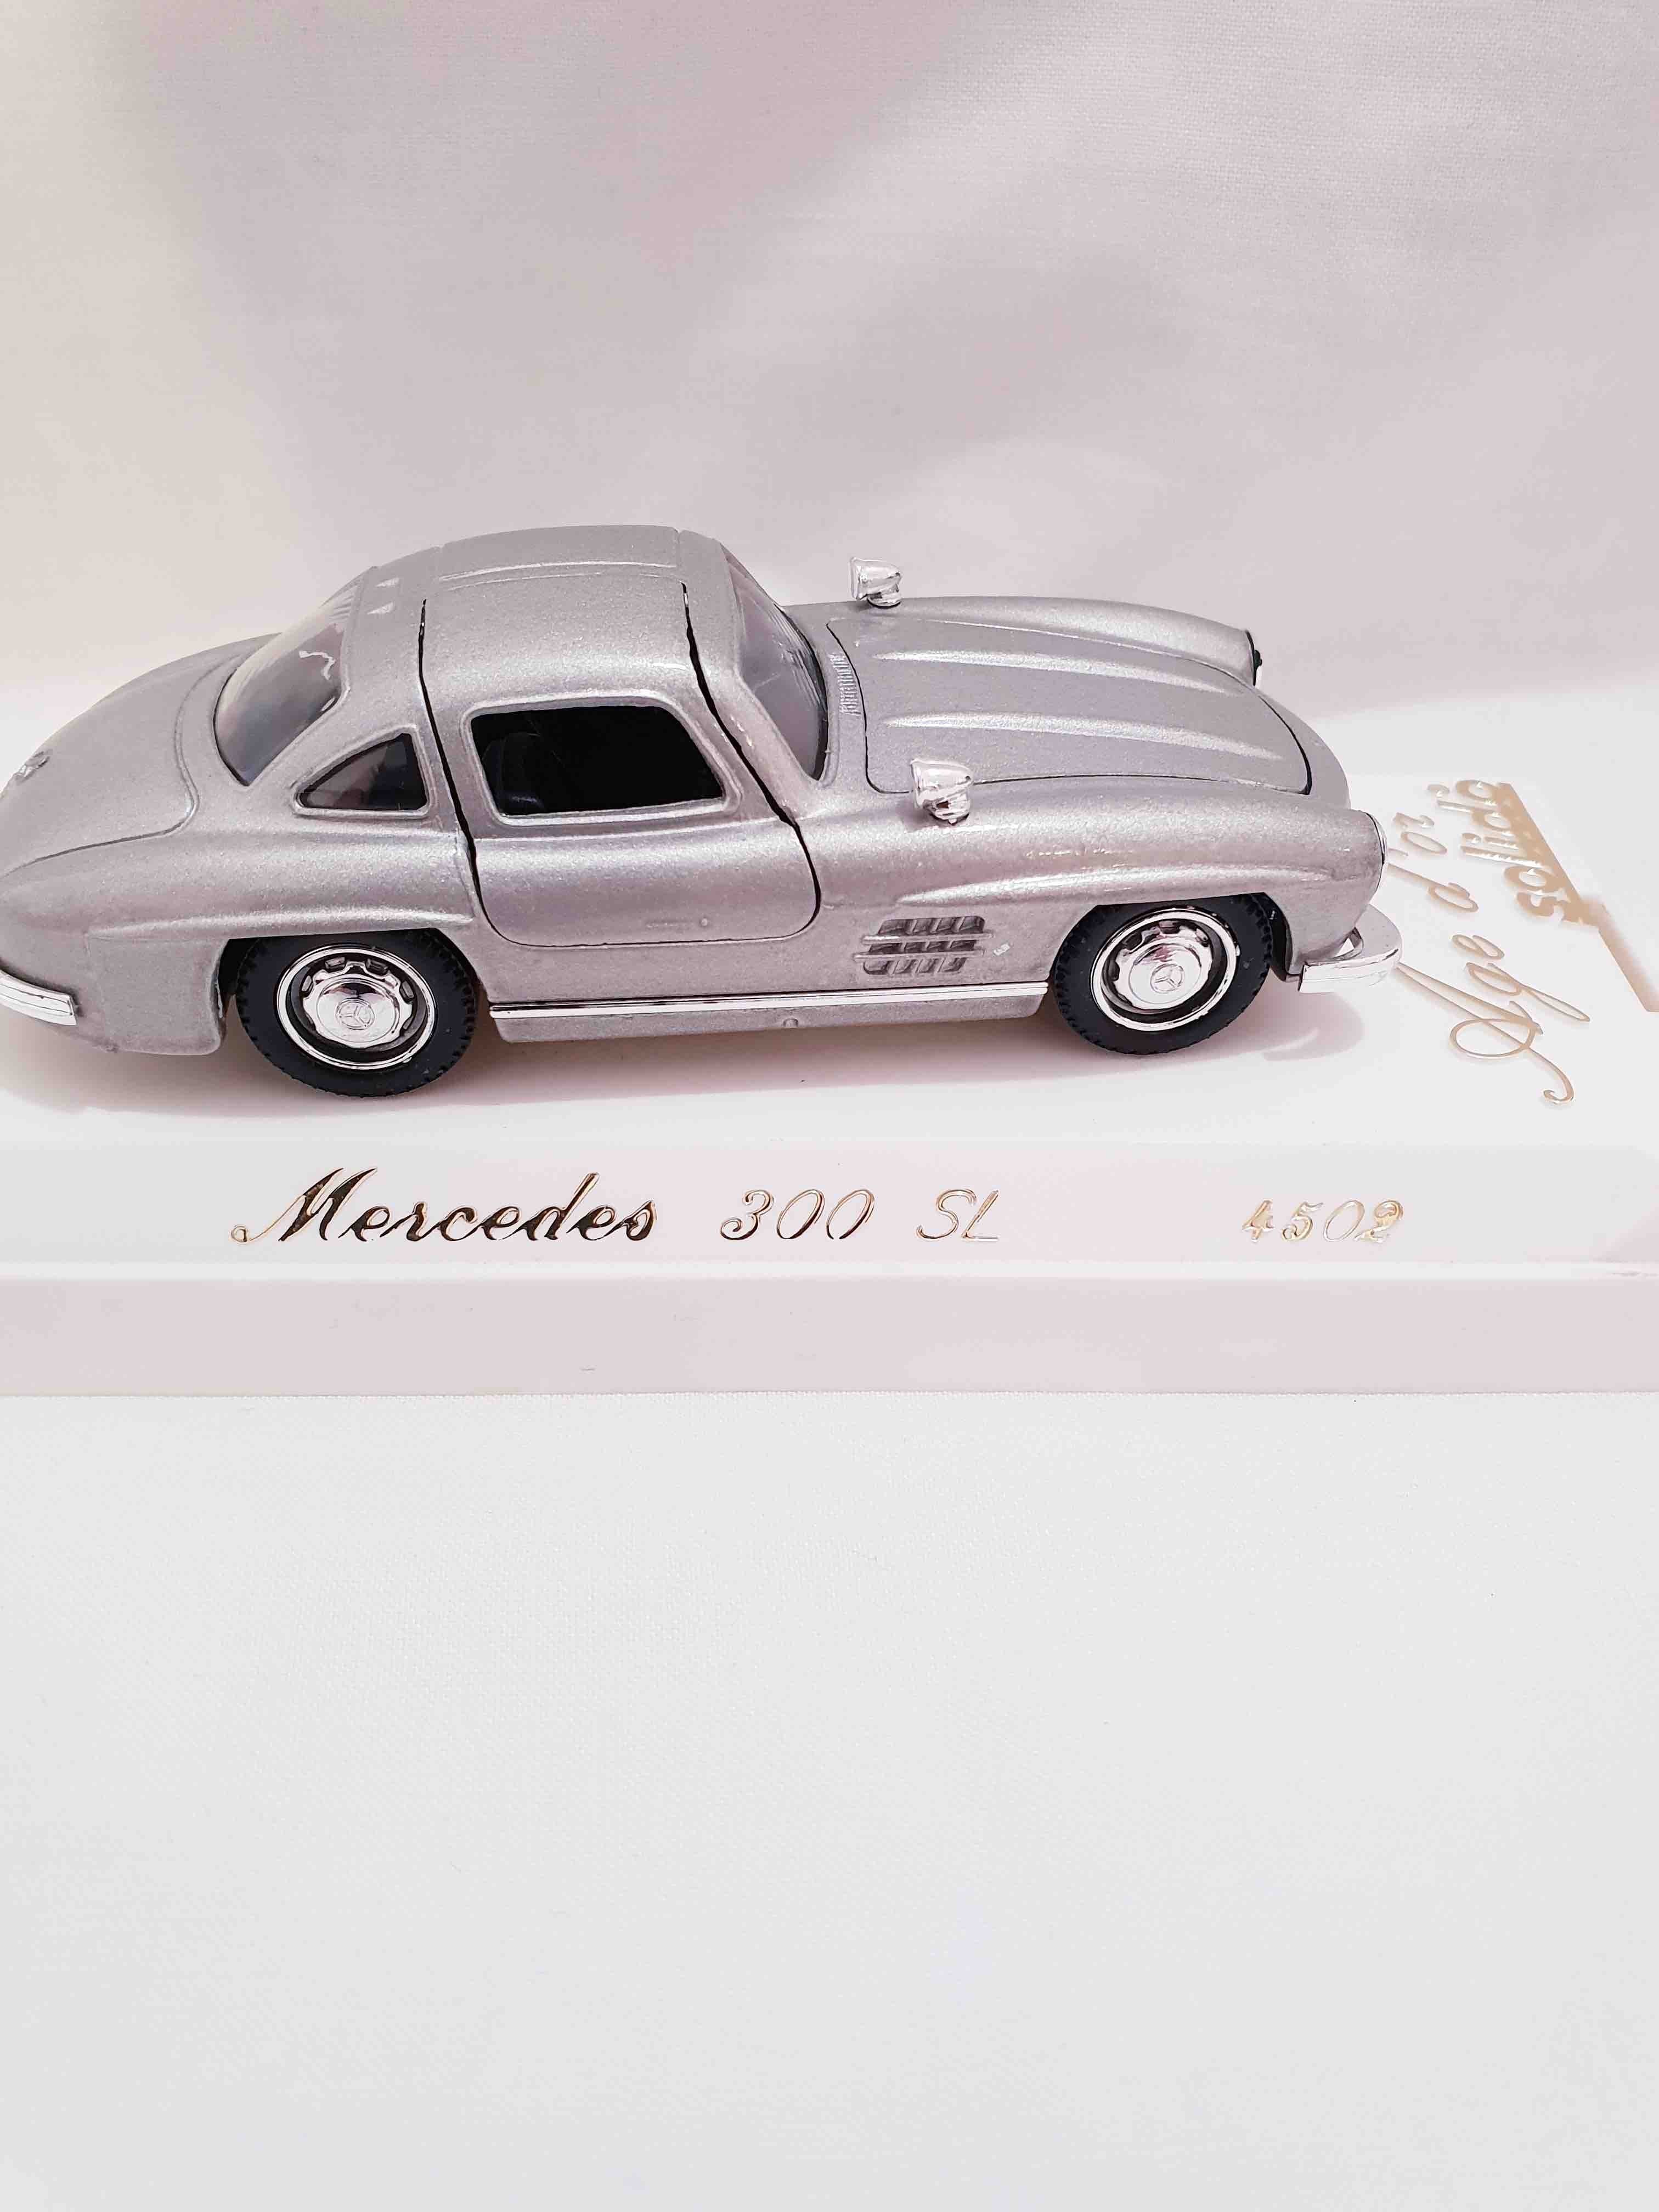 MERCEDES 300 SL 4502 SOLIDO AGE D OR